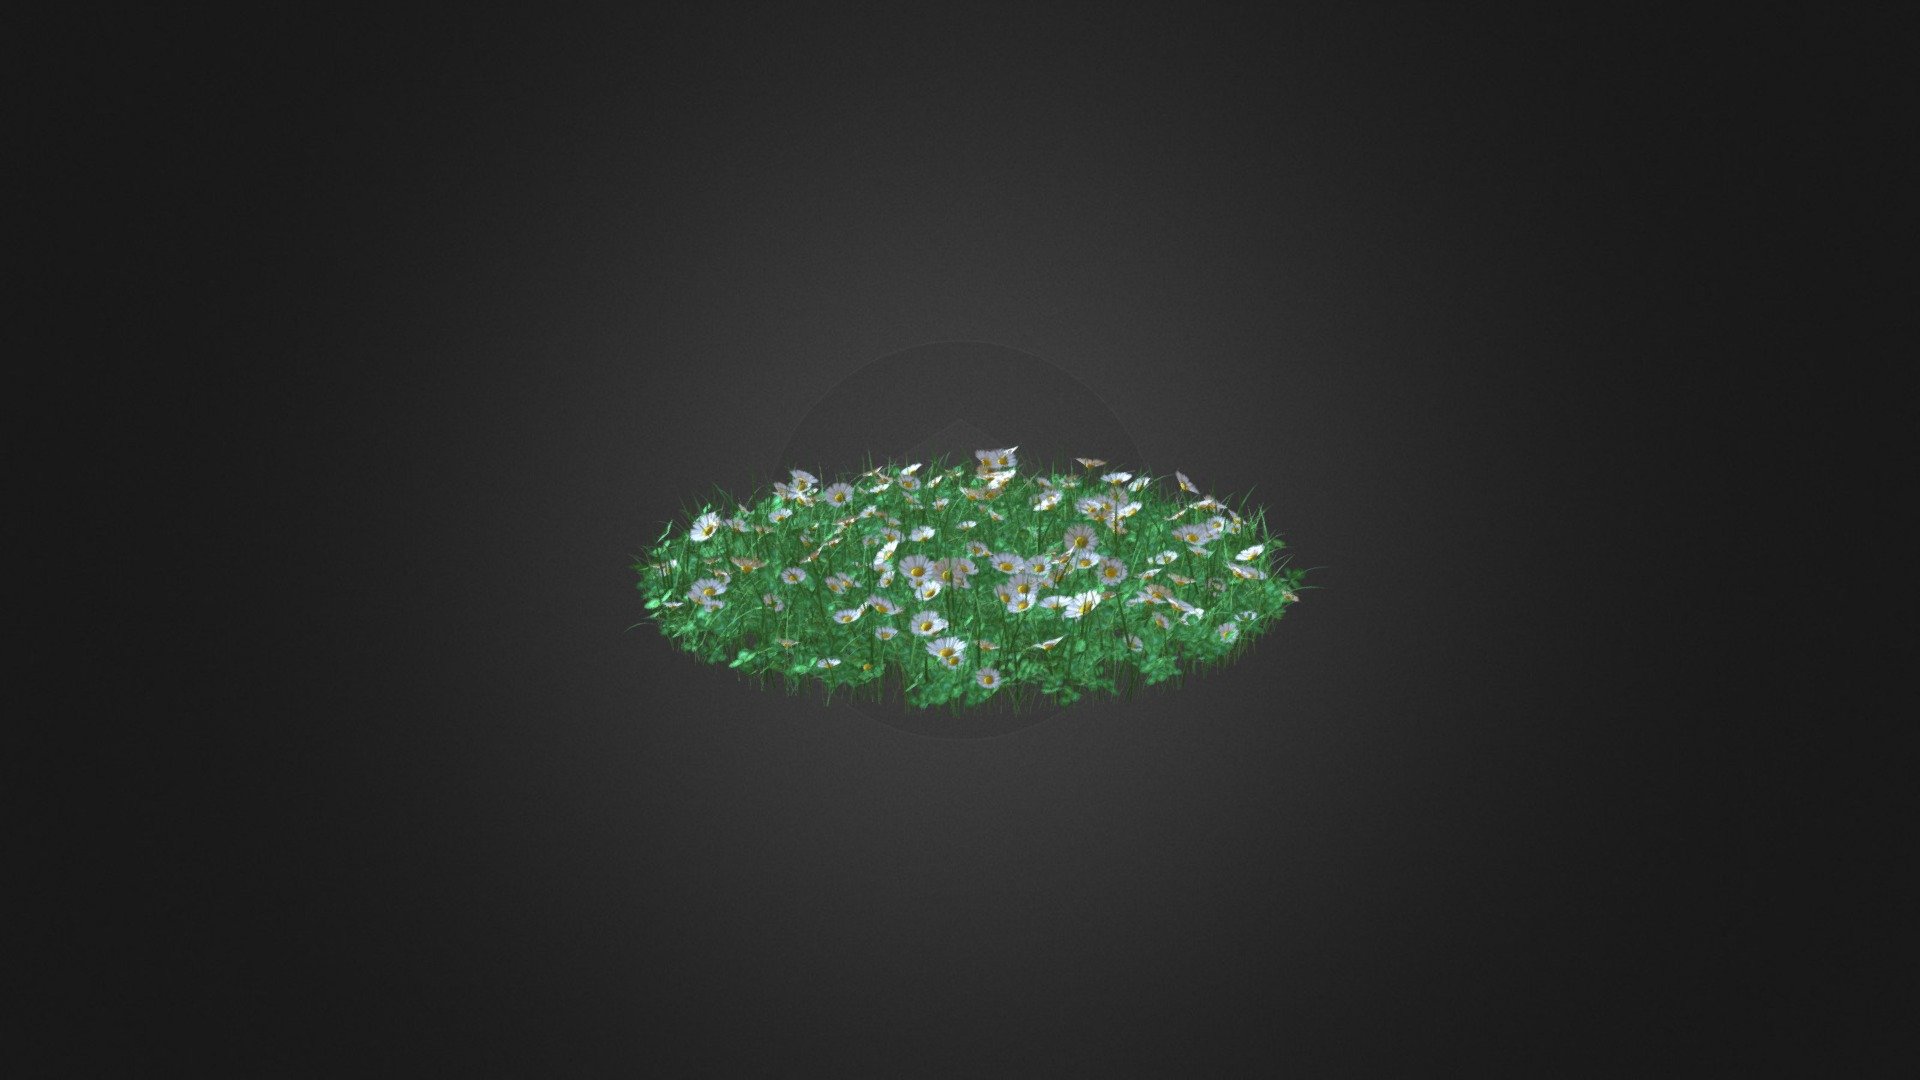 Round shaped grass with some clover and daisy (Bellis perennis) flowers 3d model. Diameter: 100cm. Compatible with 3ds max 2010 or higher, Cinema 4D and many more 3d model